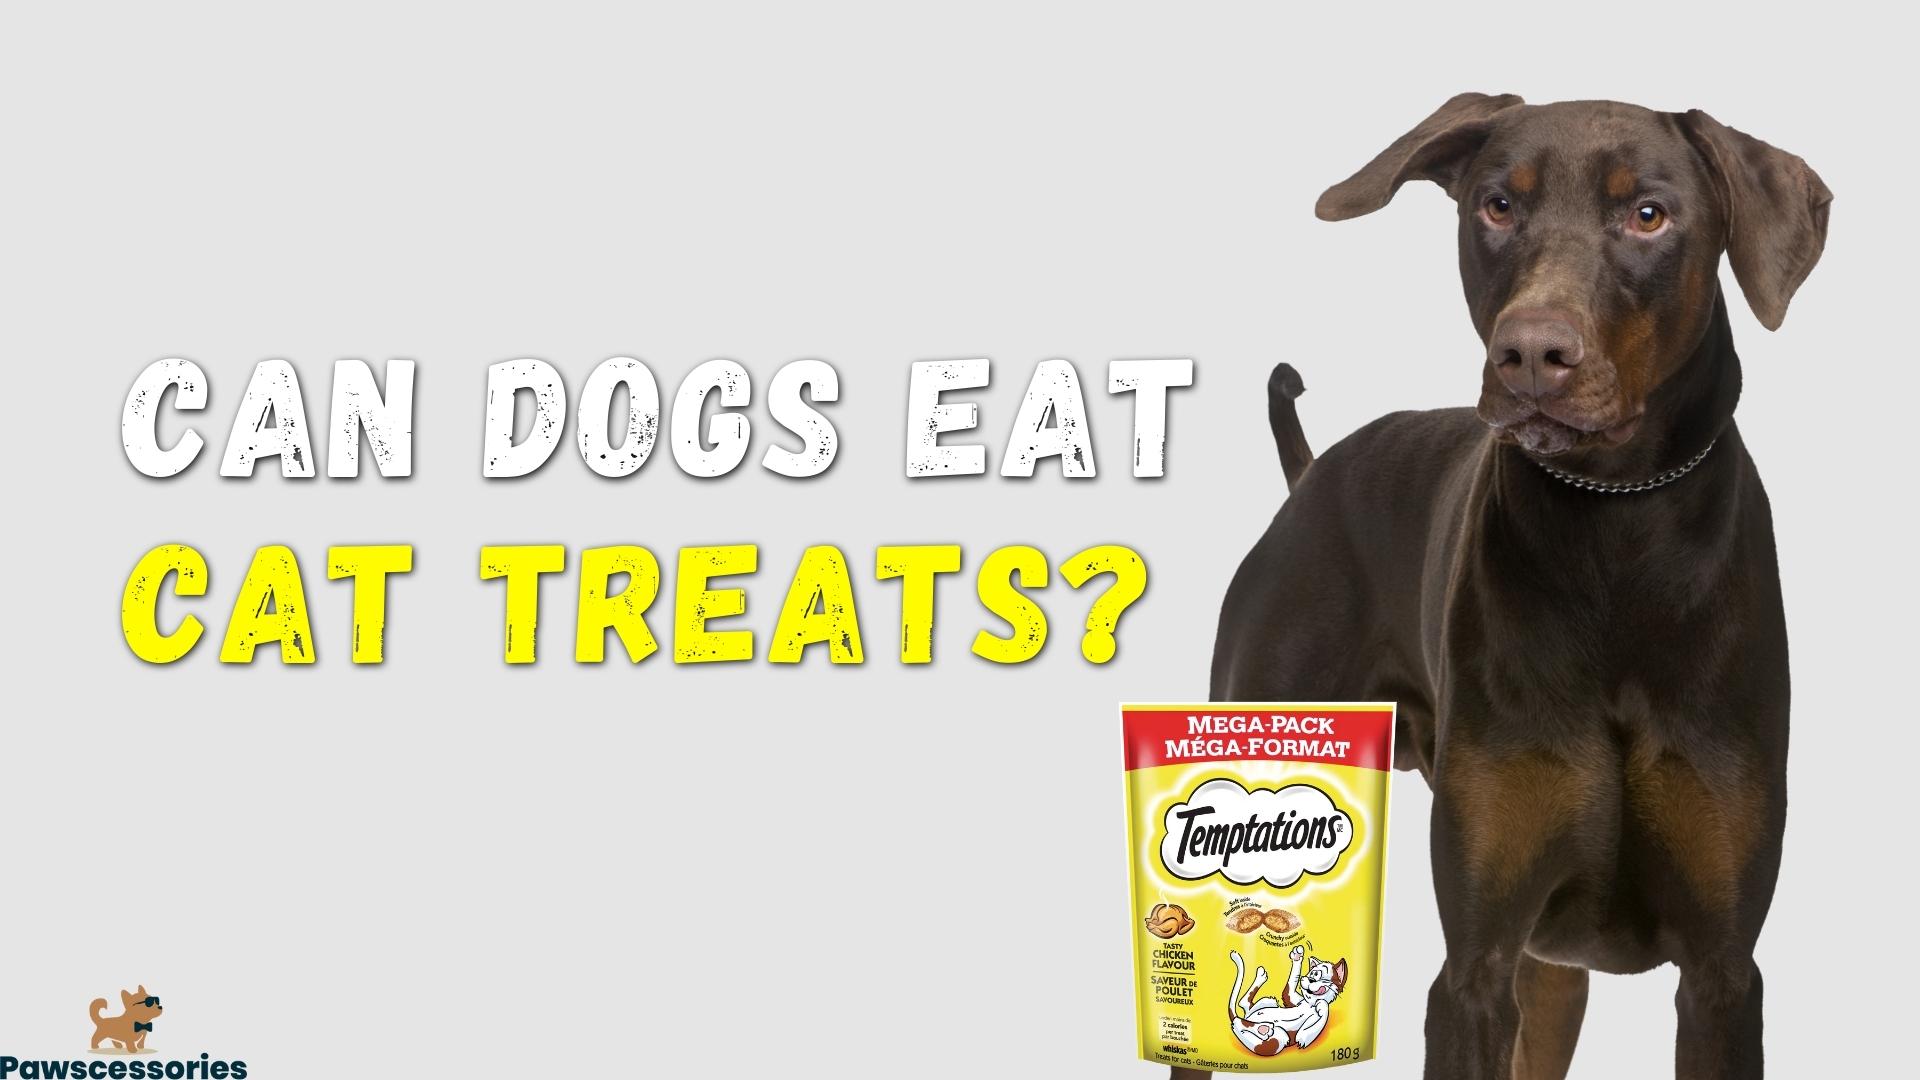 Can dogs eat cat treats